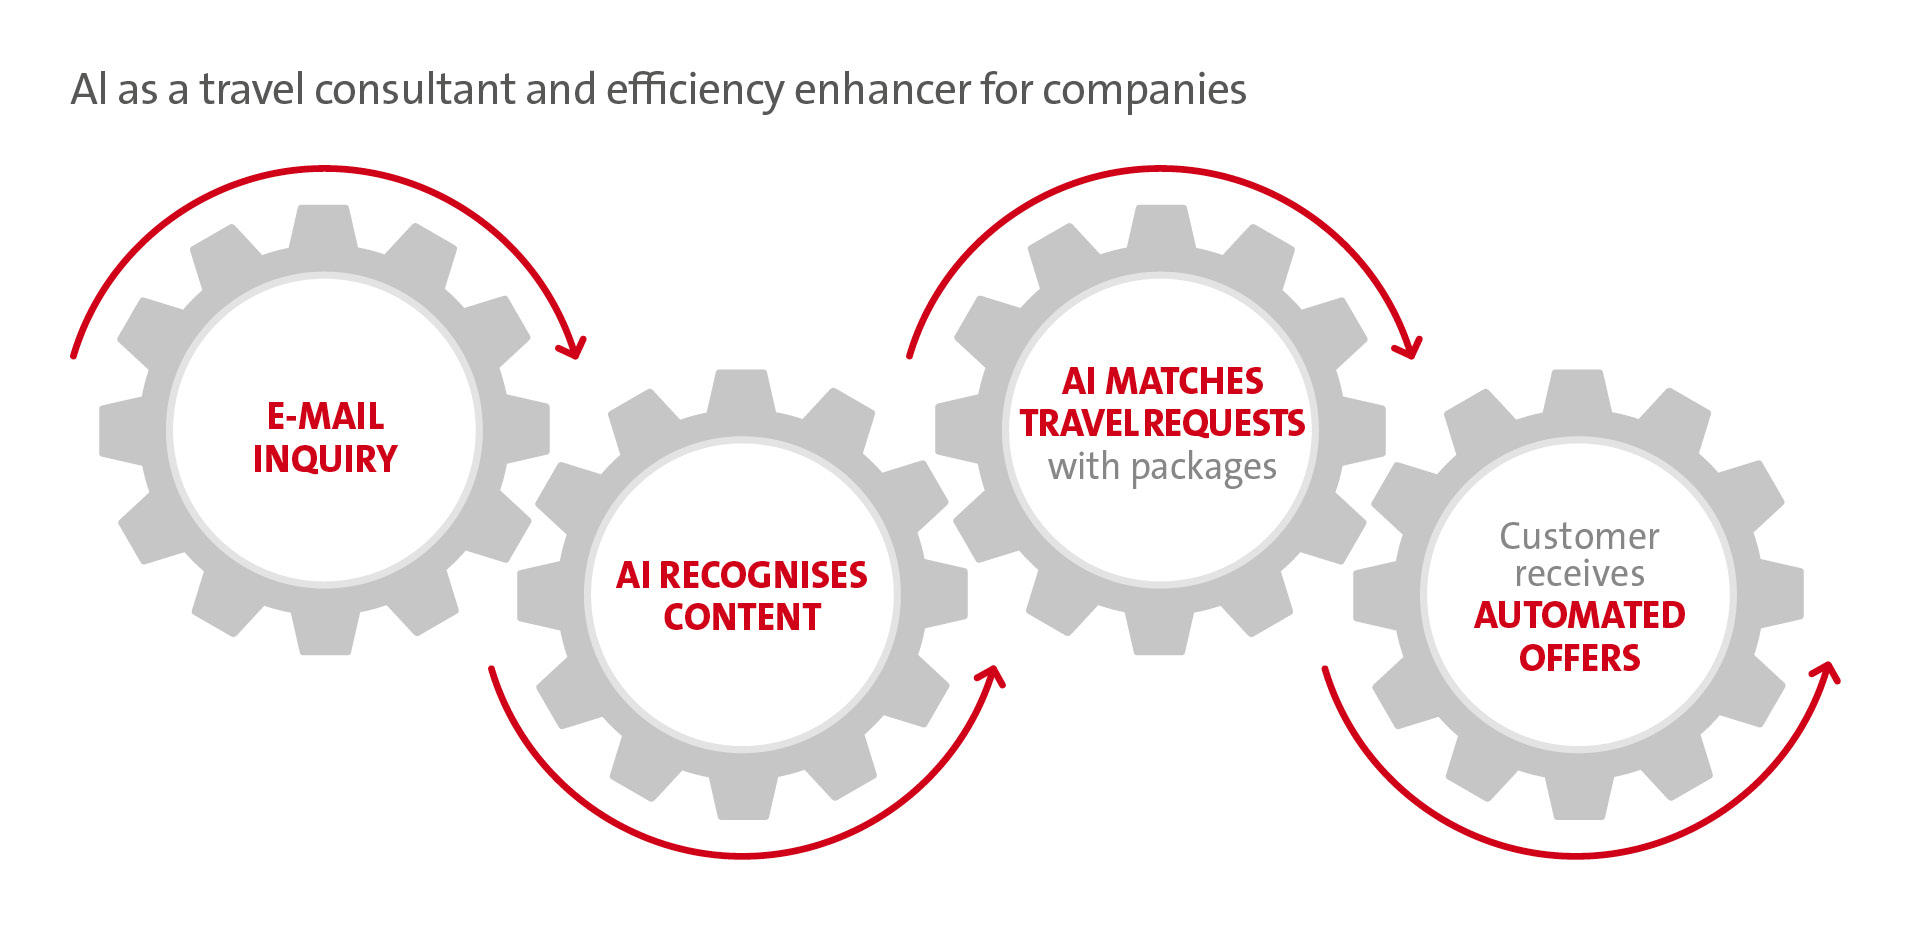 Graphic AI as a travel consultant and efficiency enhacer for companies